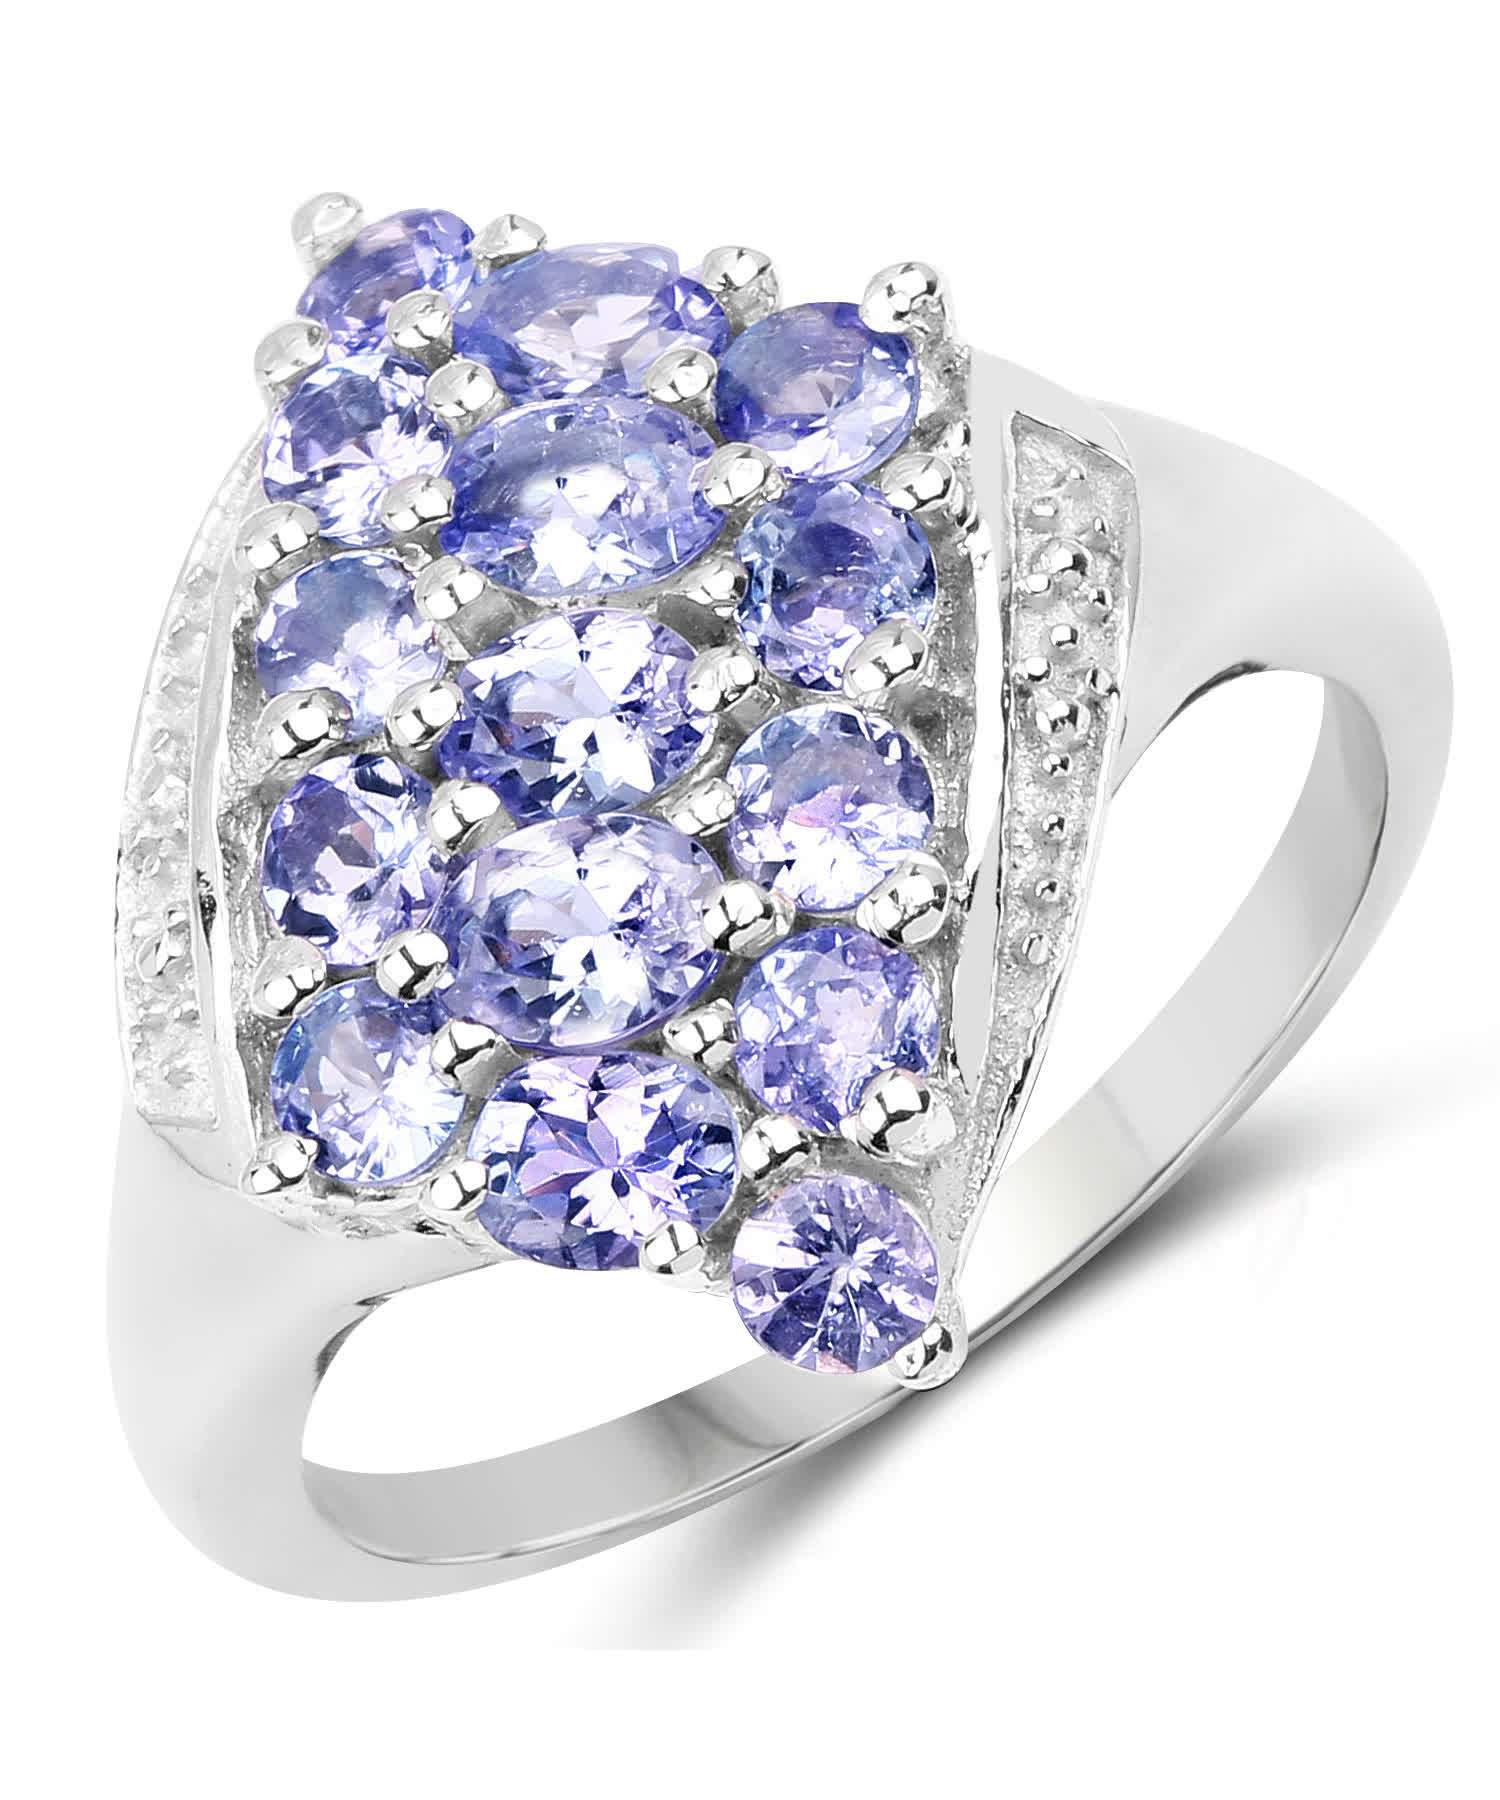 1.85ctw Natural Tanzanite Rhodium Plated 925 Sterling Silver Right Hand Ring View 1